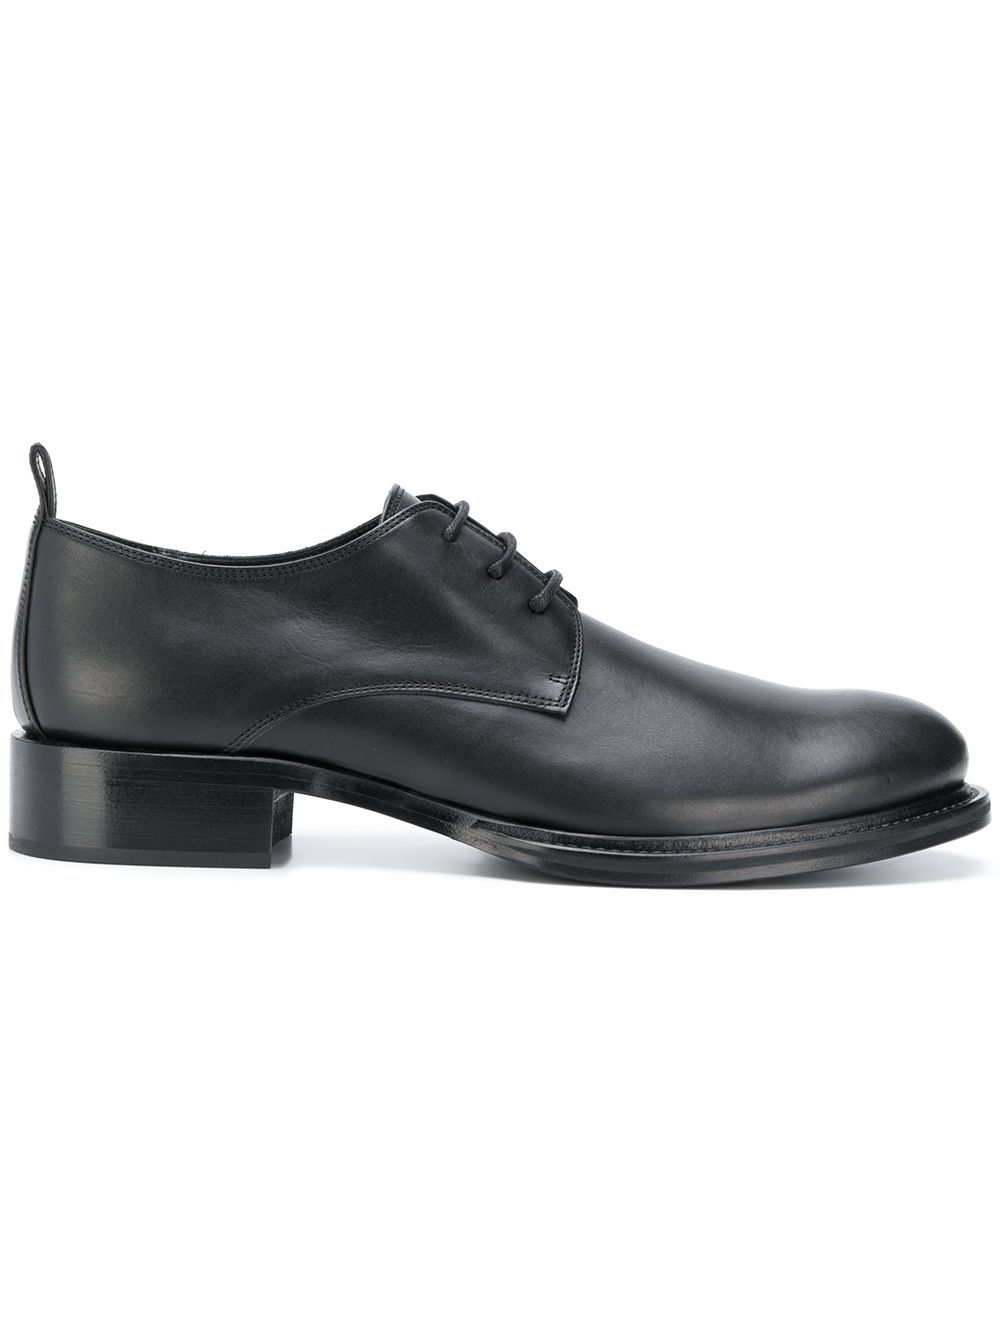 Ann Demeulemeester lace-up oxford shoes - Black | FarFetch Global